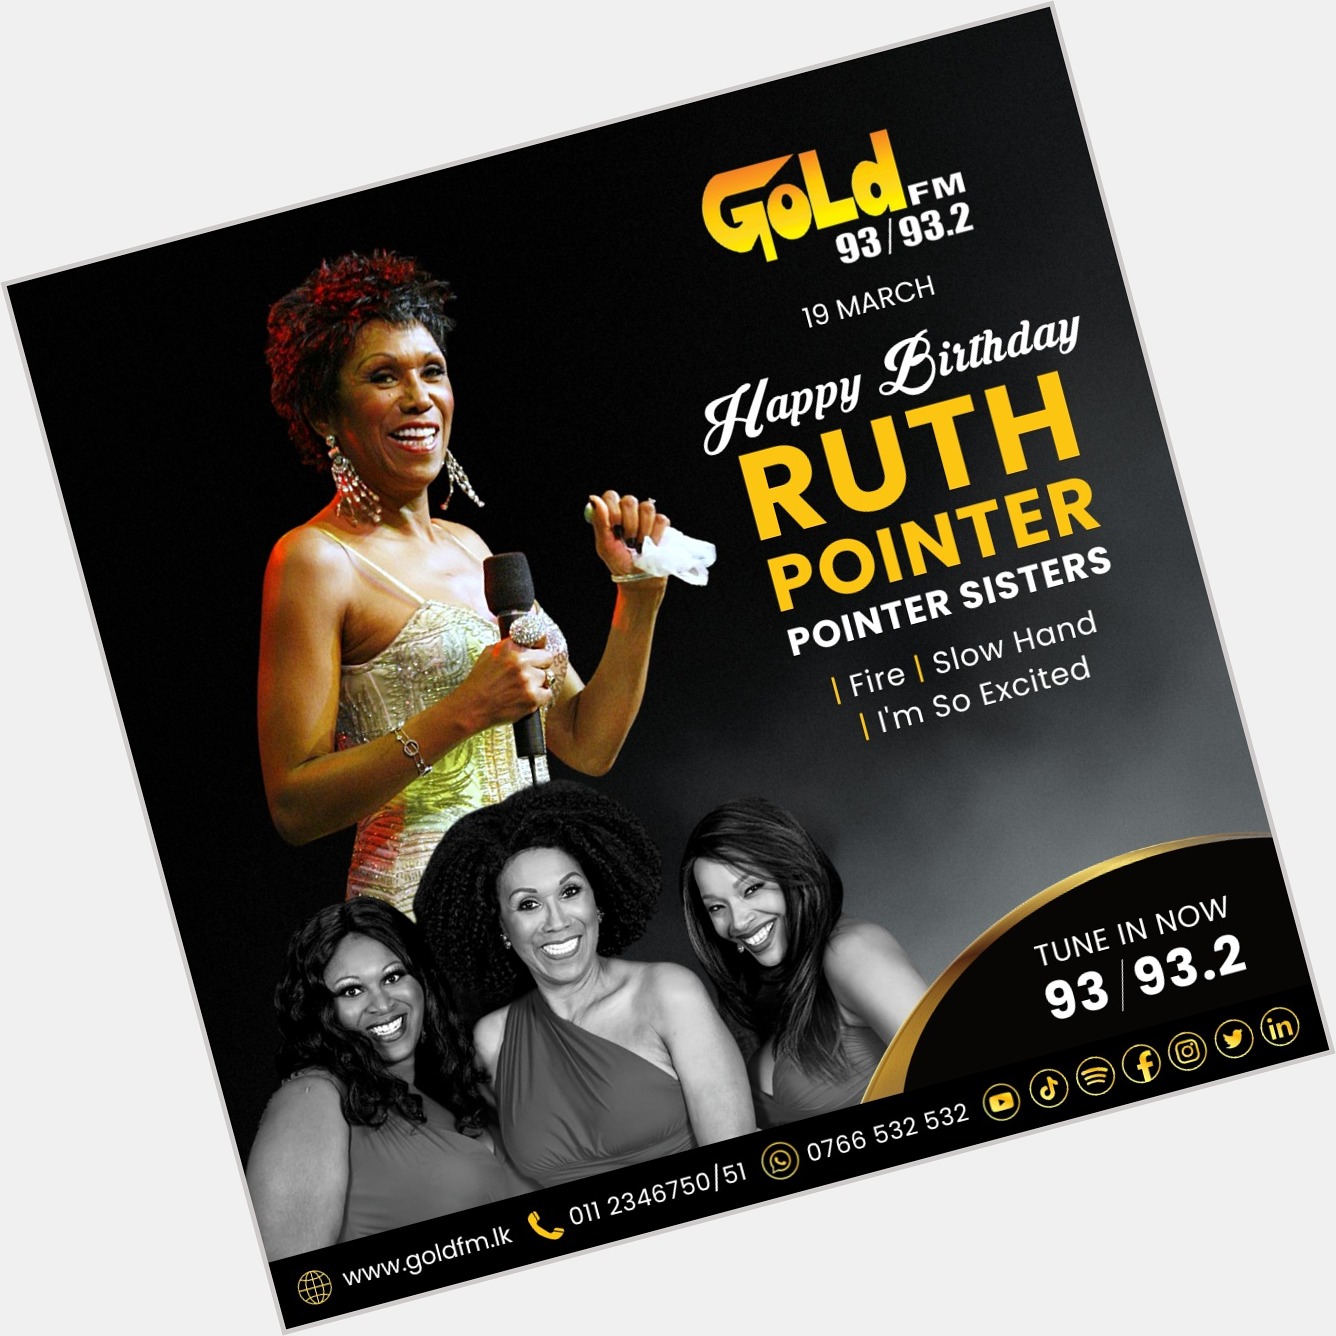 HAPPY BIRTHDAY TO RUTH POINTER TUNE IN NOW 93 / 93.2 Island wide      